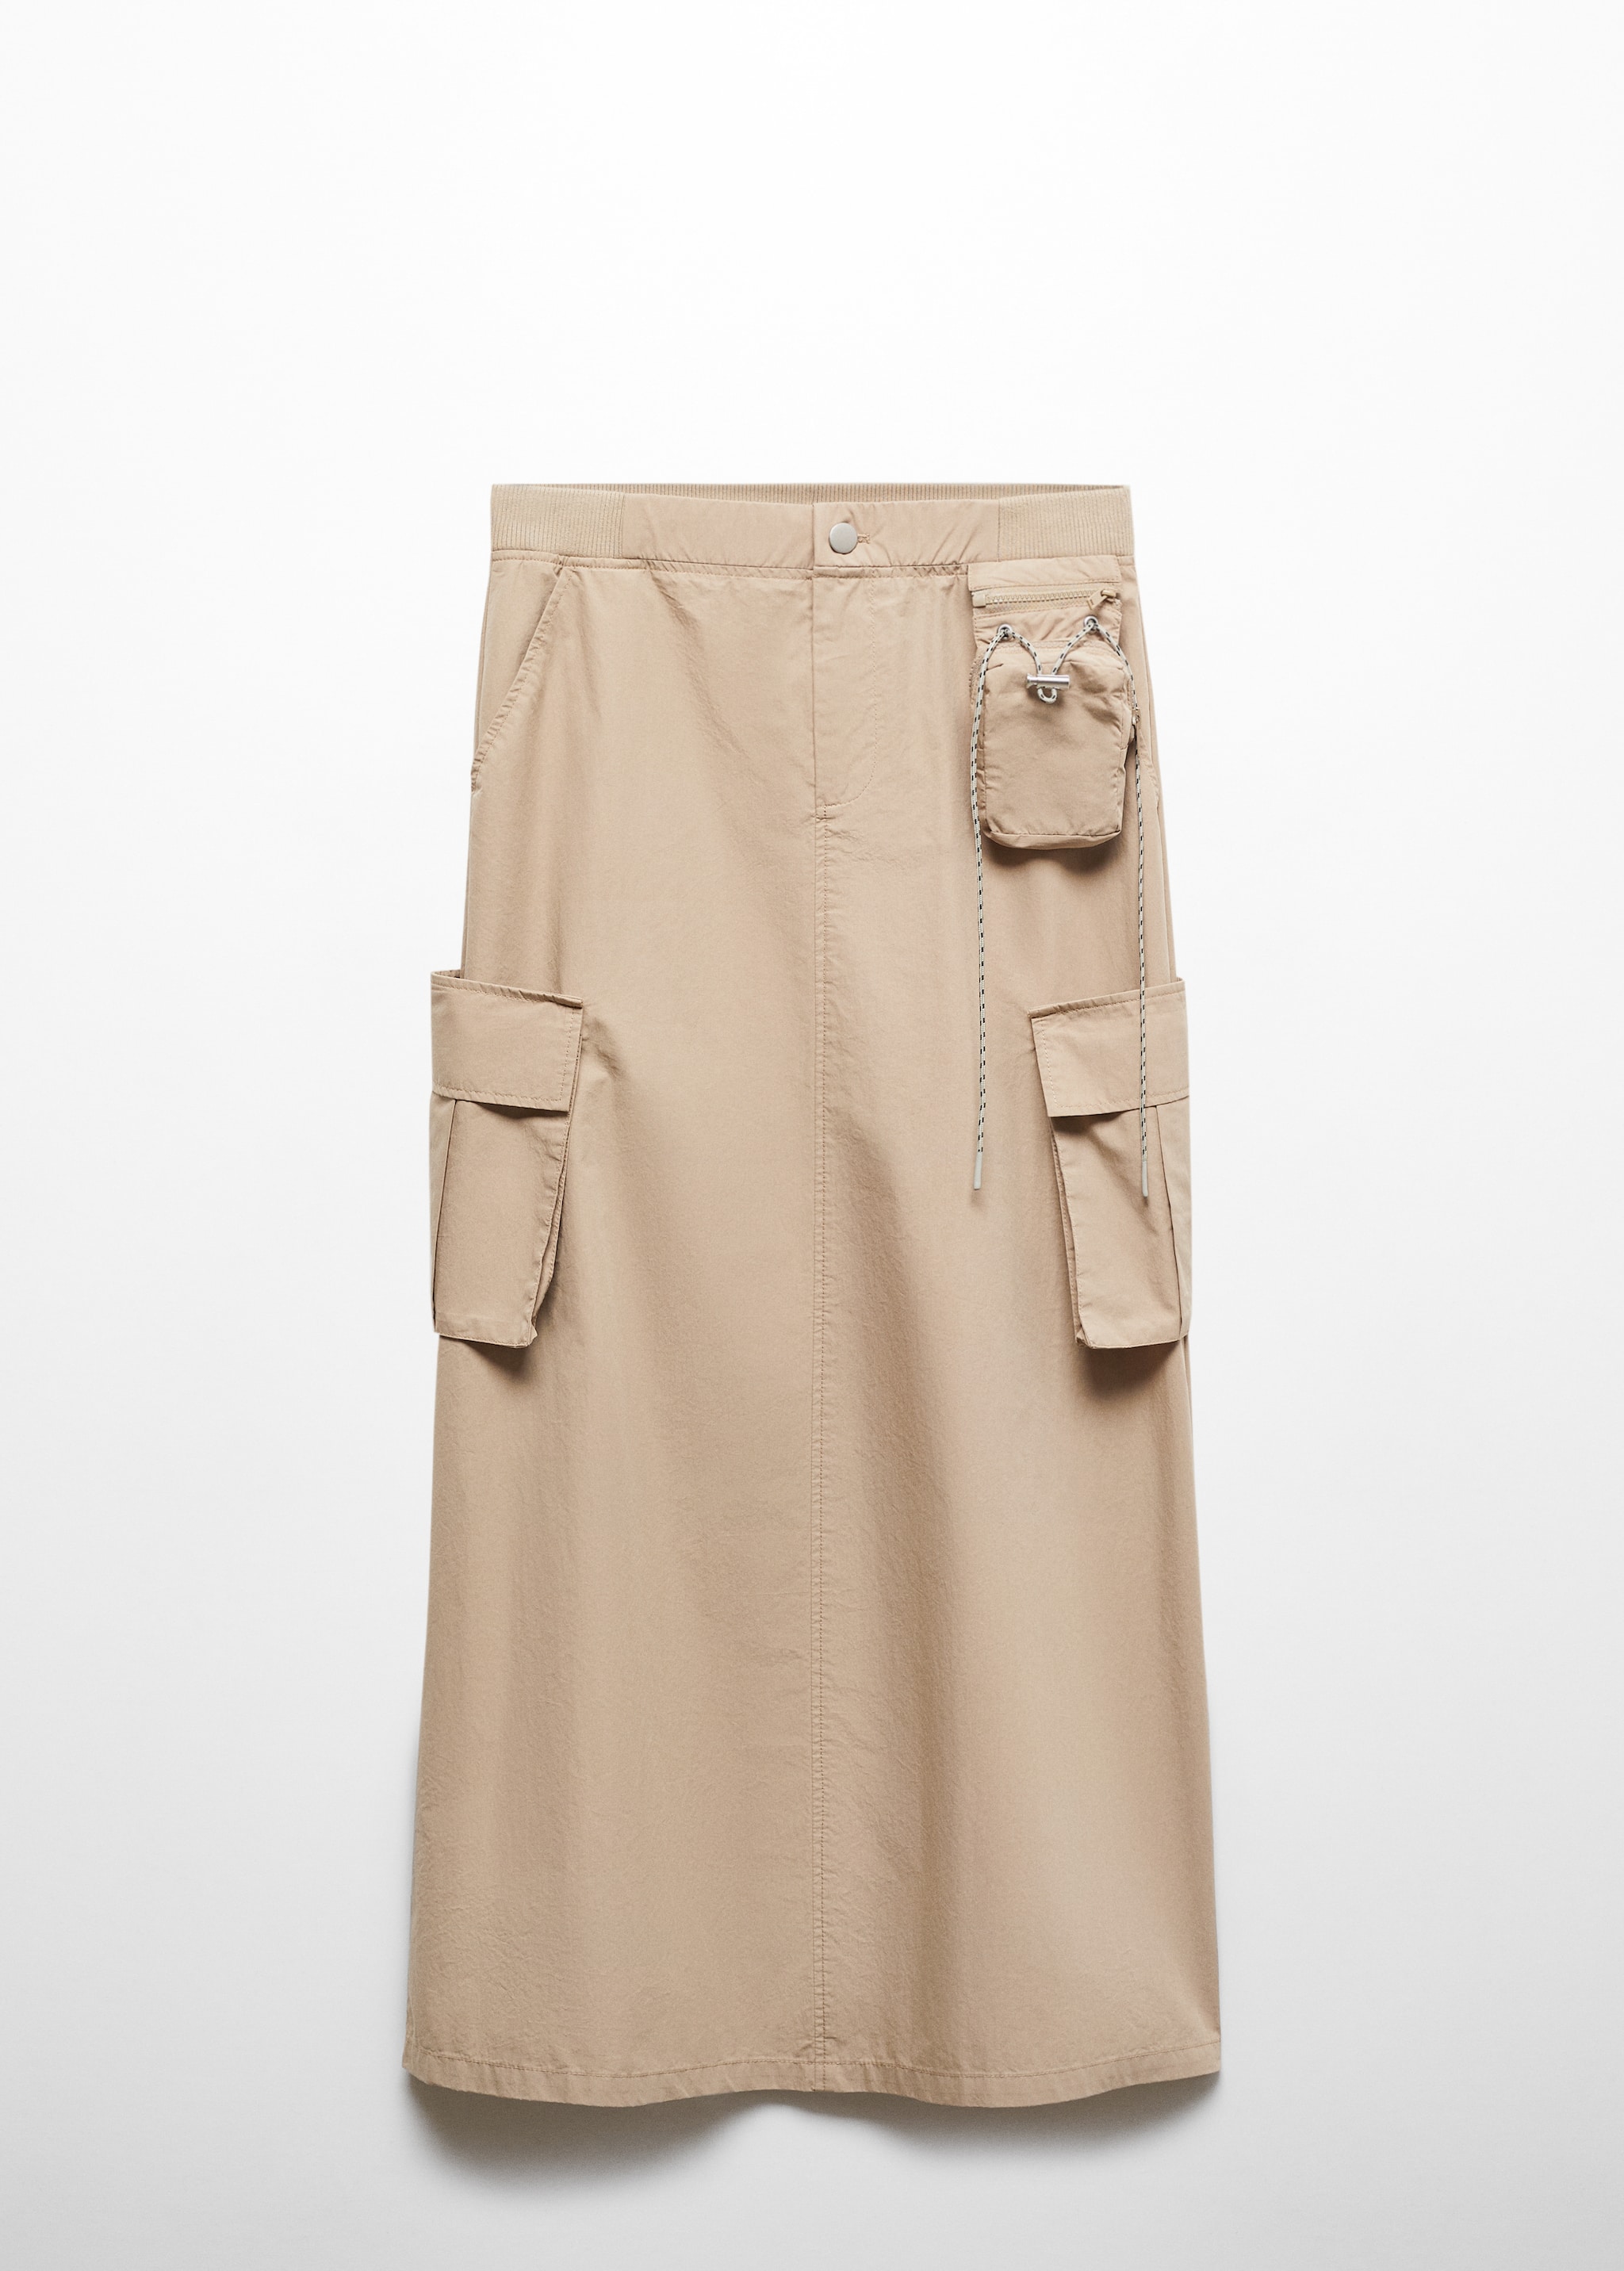 Long cargo skirt with pocket - Article without model